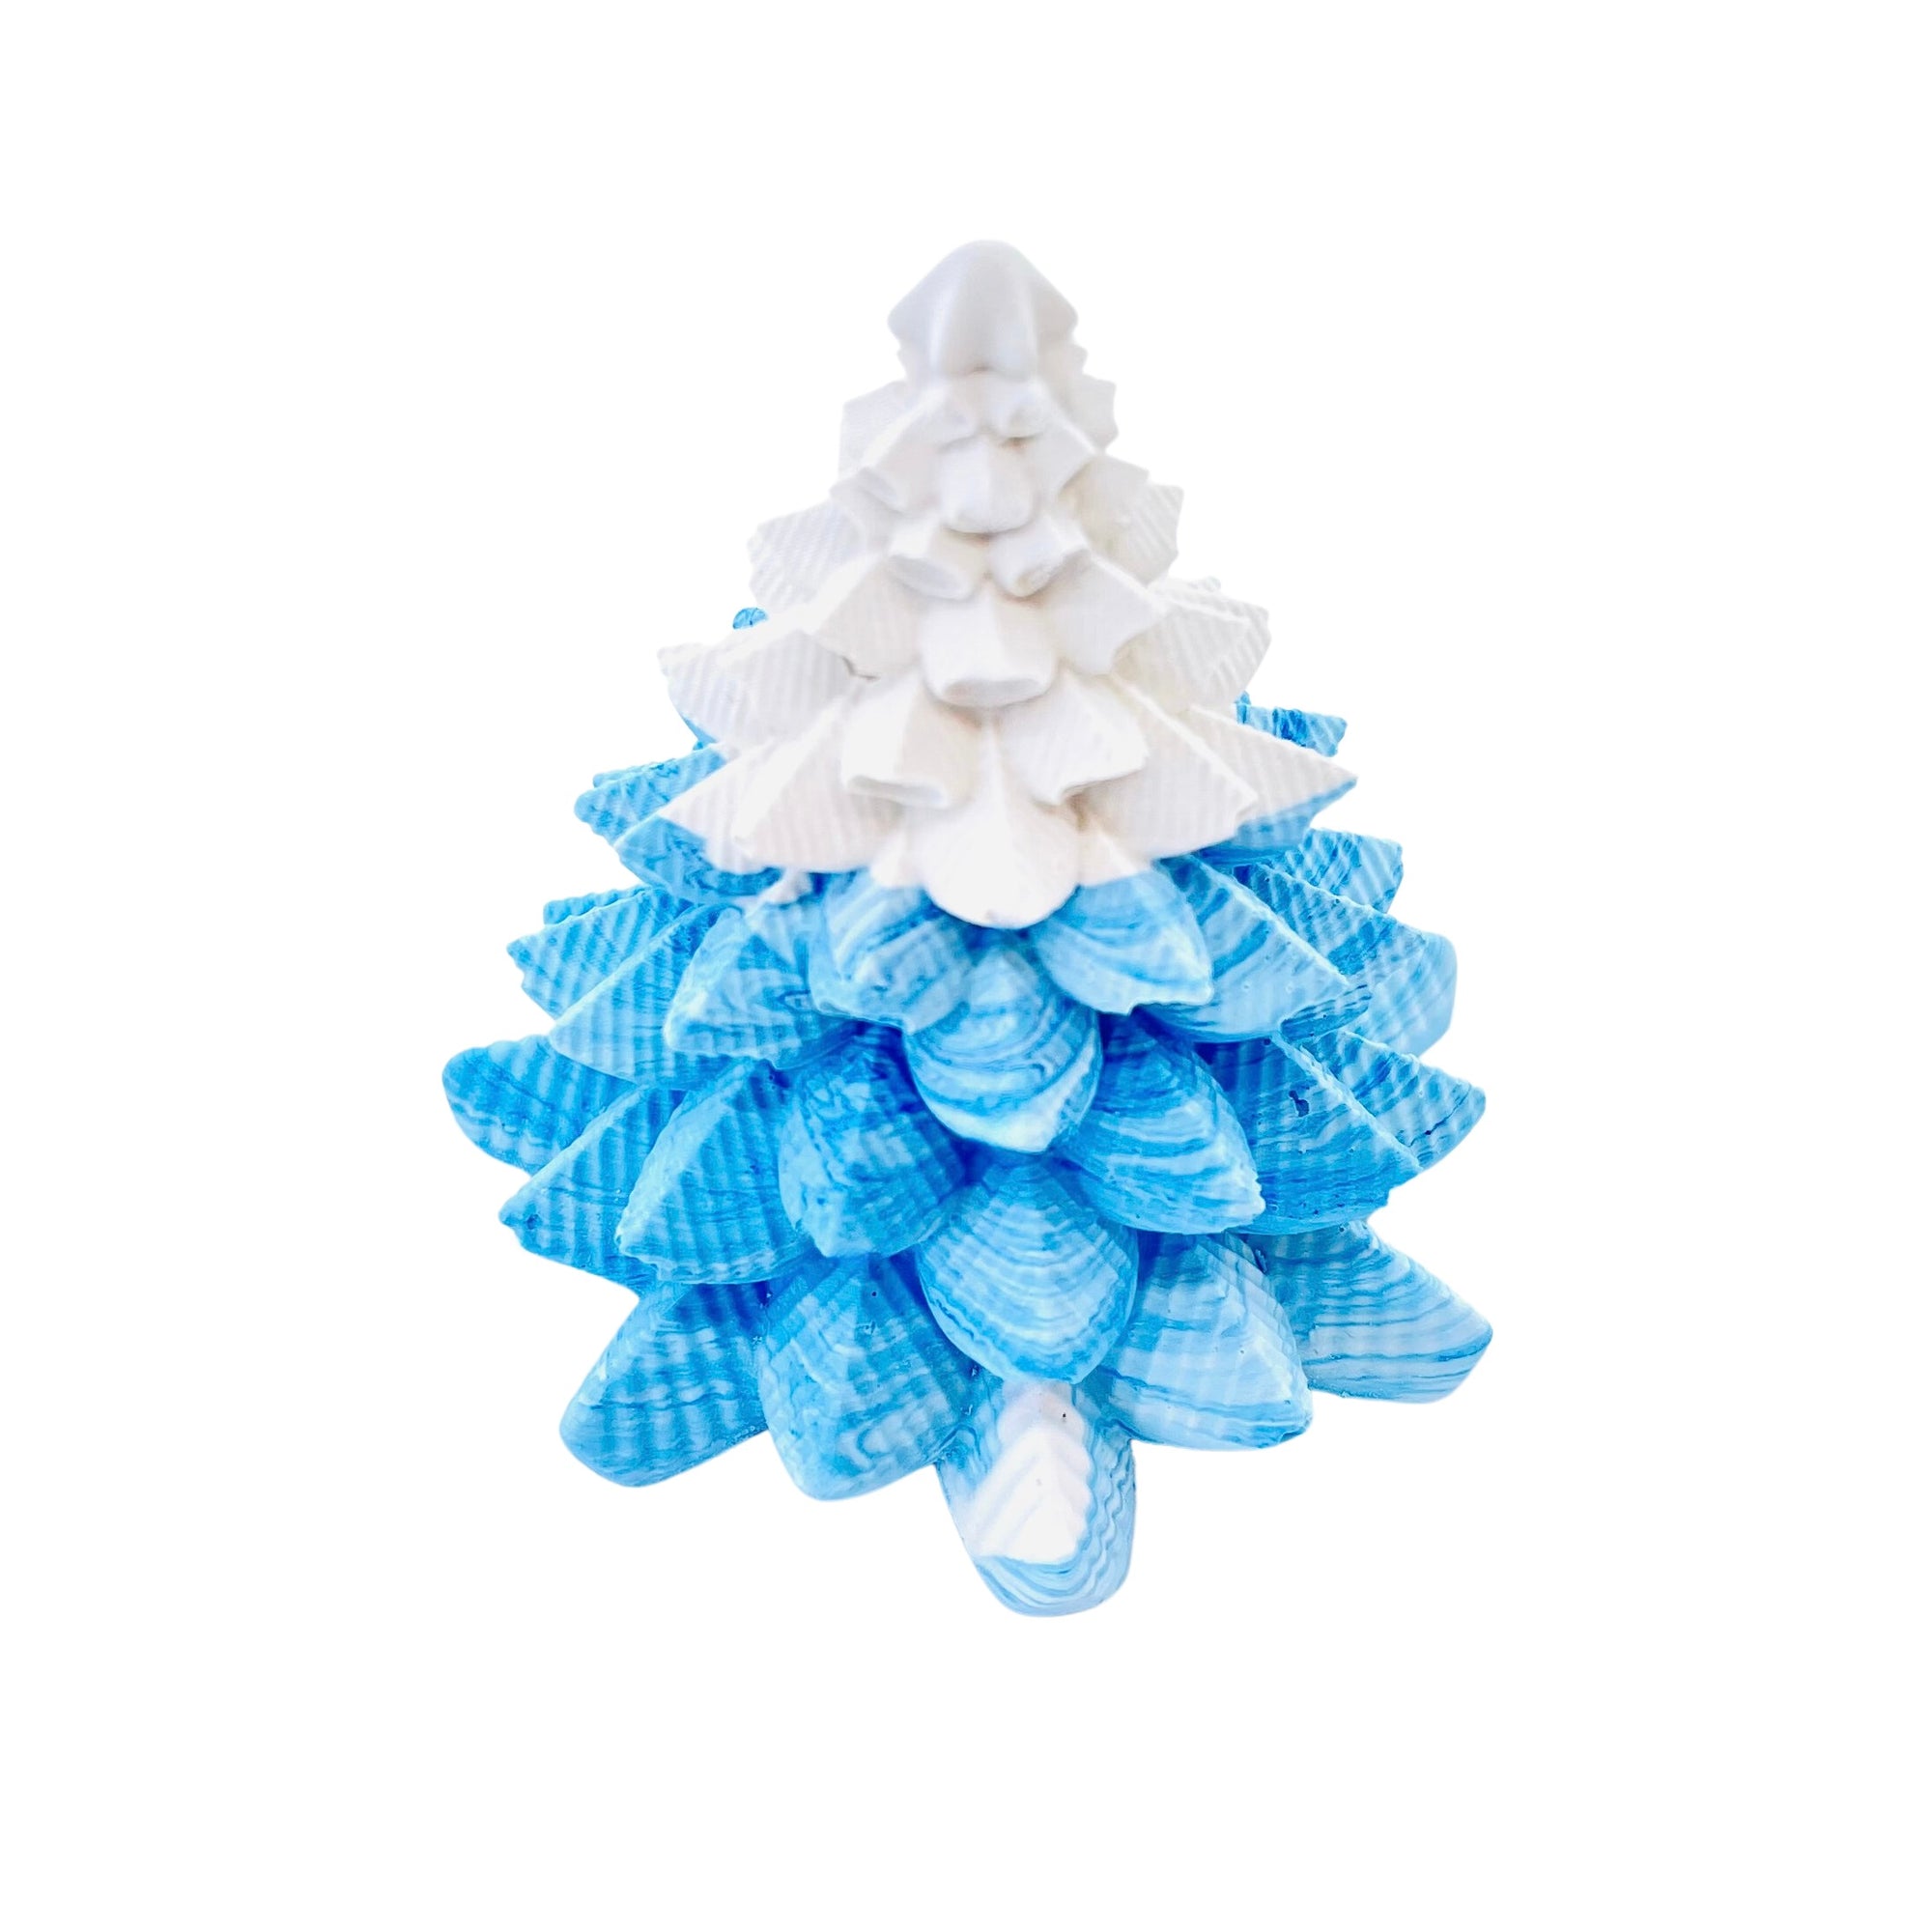 A small Jesmonite Christmas tree measuring 8.5cm tall and 7.5cm wide marbled with blue and white  pigment.